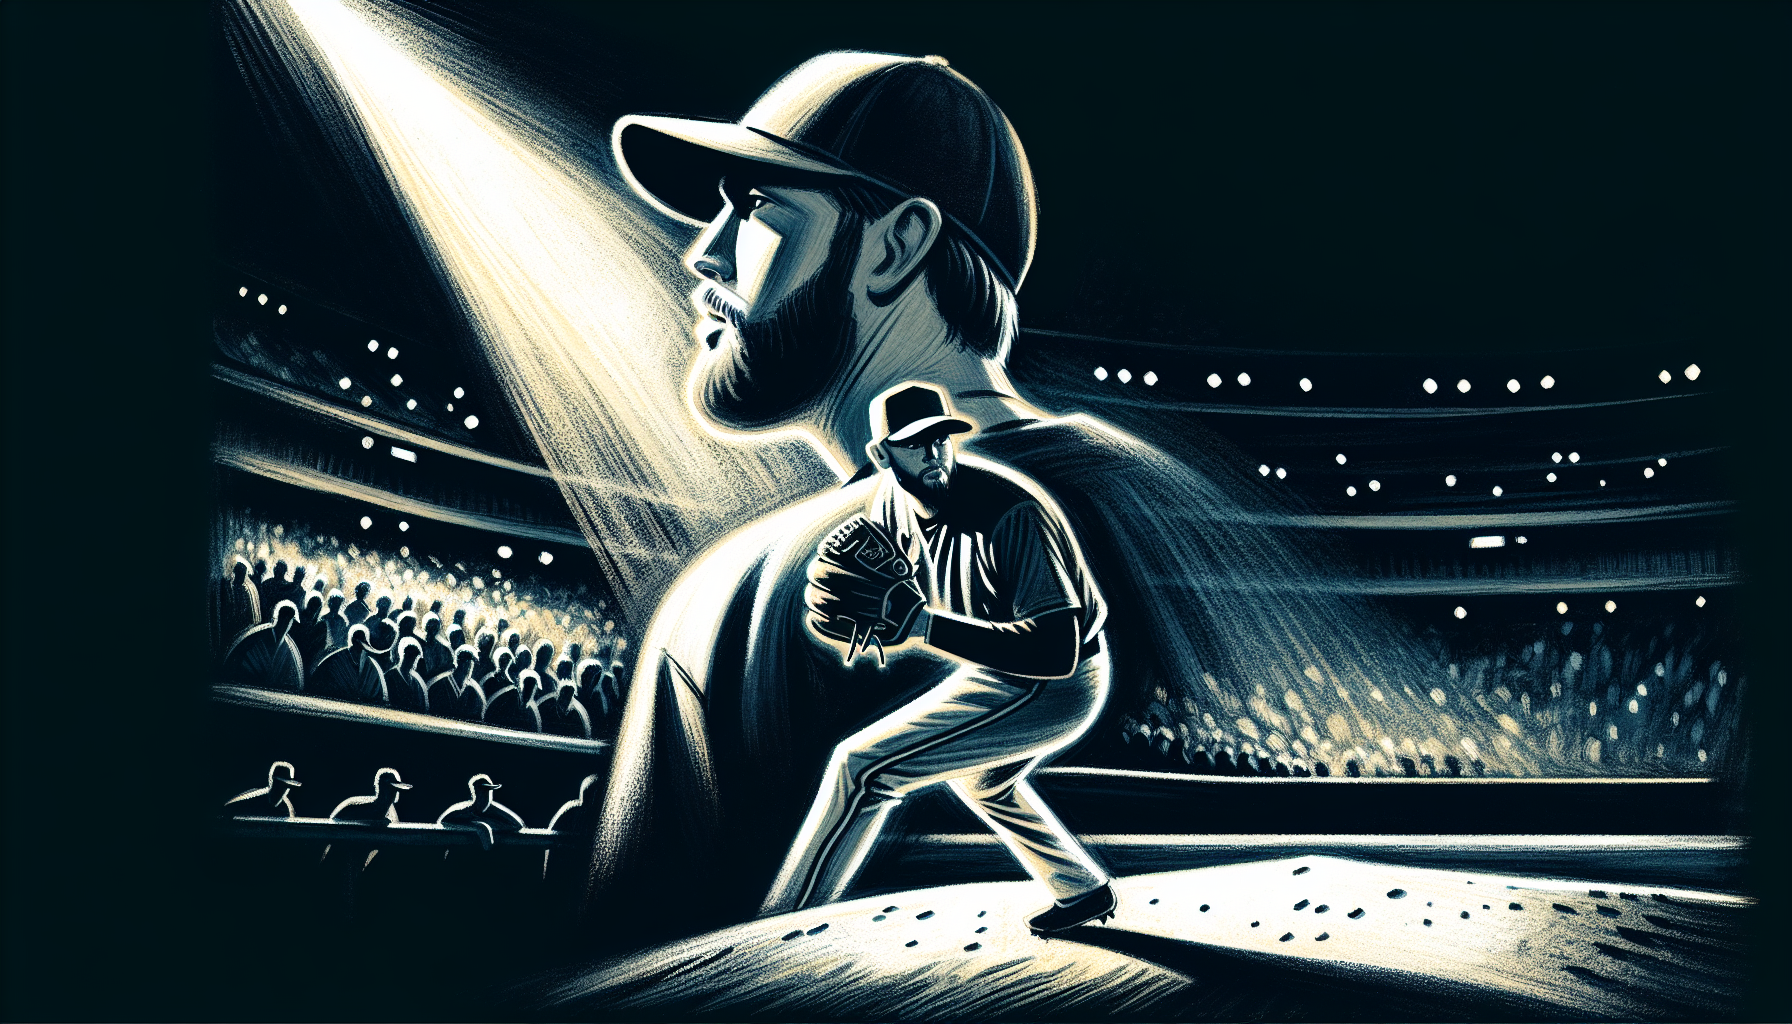 Illustration of a baseball pitcher warming up in the bullpen